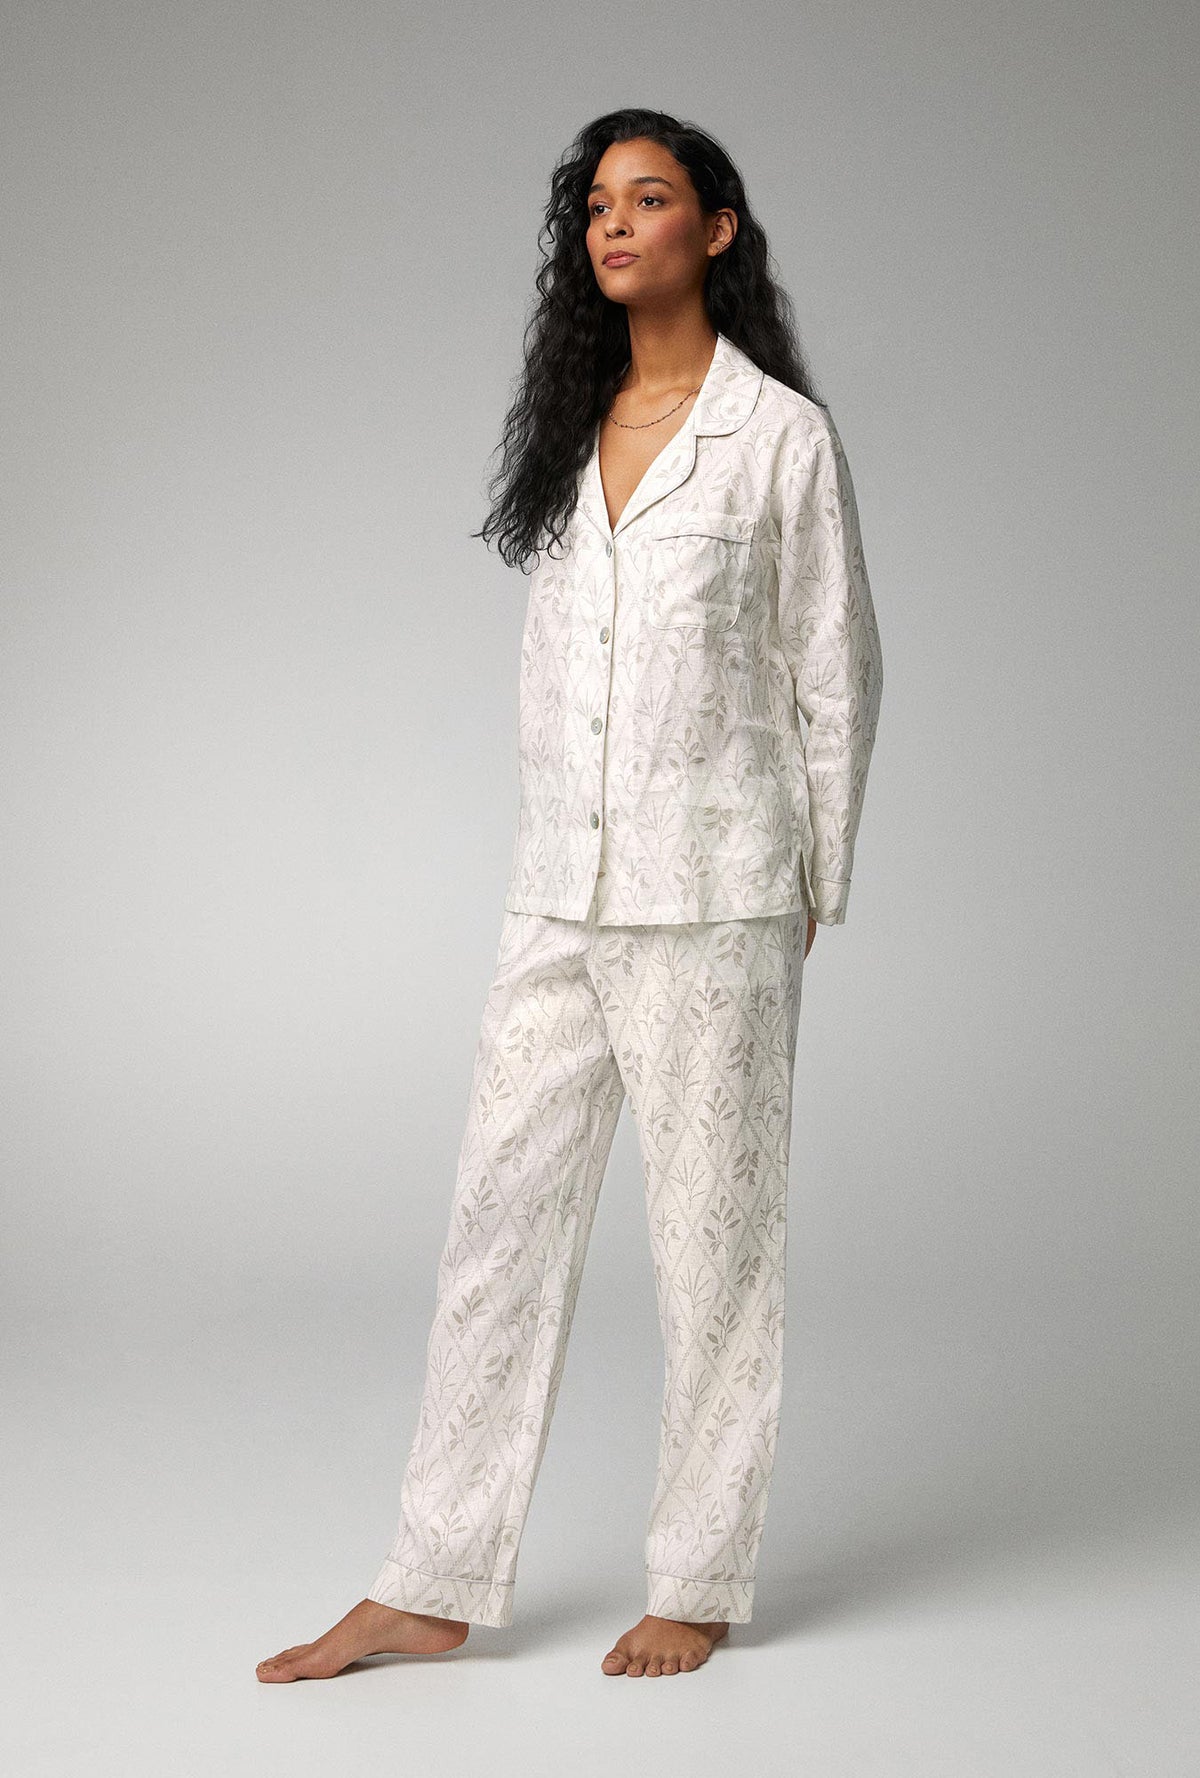 A lady wearing Long Sleeve Classic Woven Linen PJ Set with Botanical Studies print